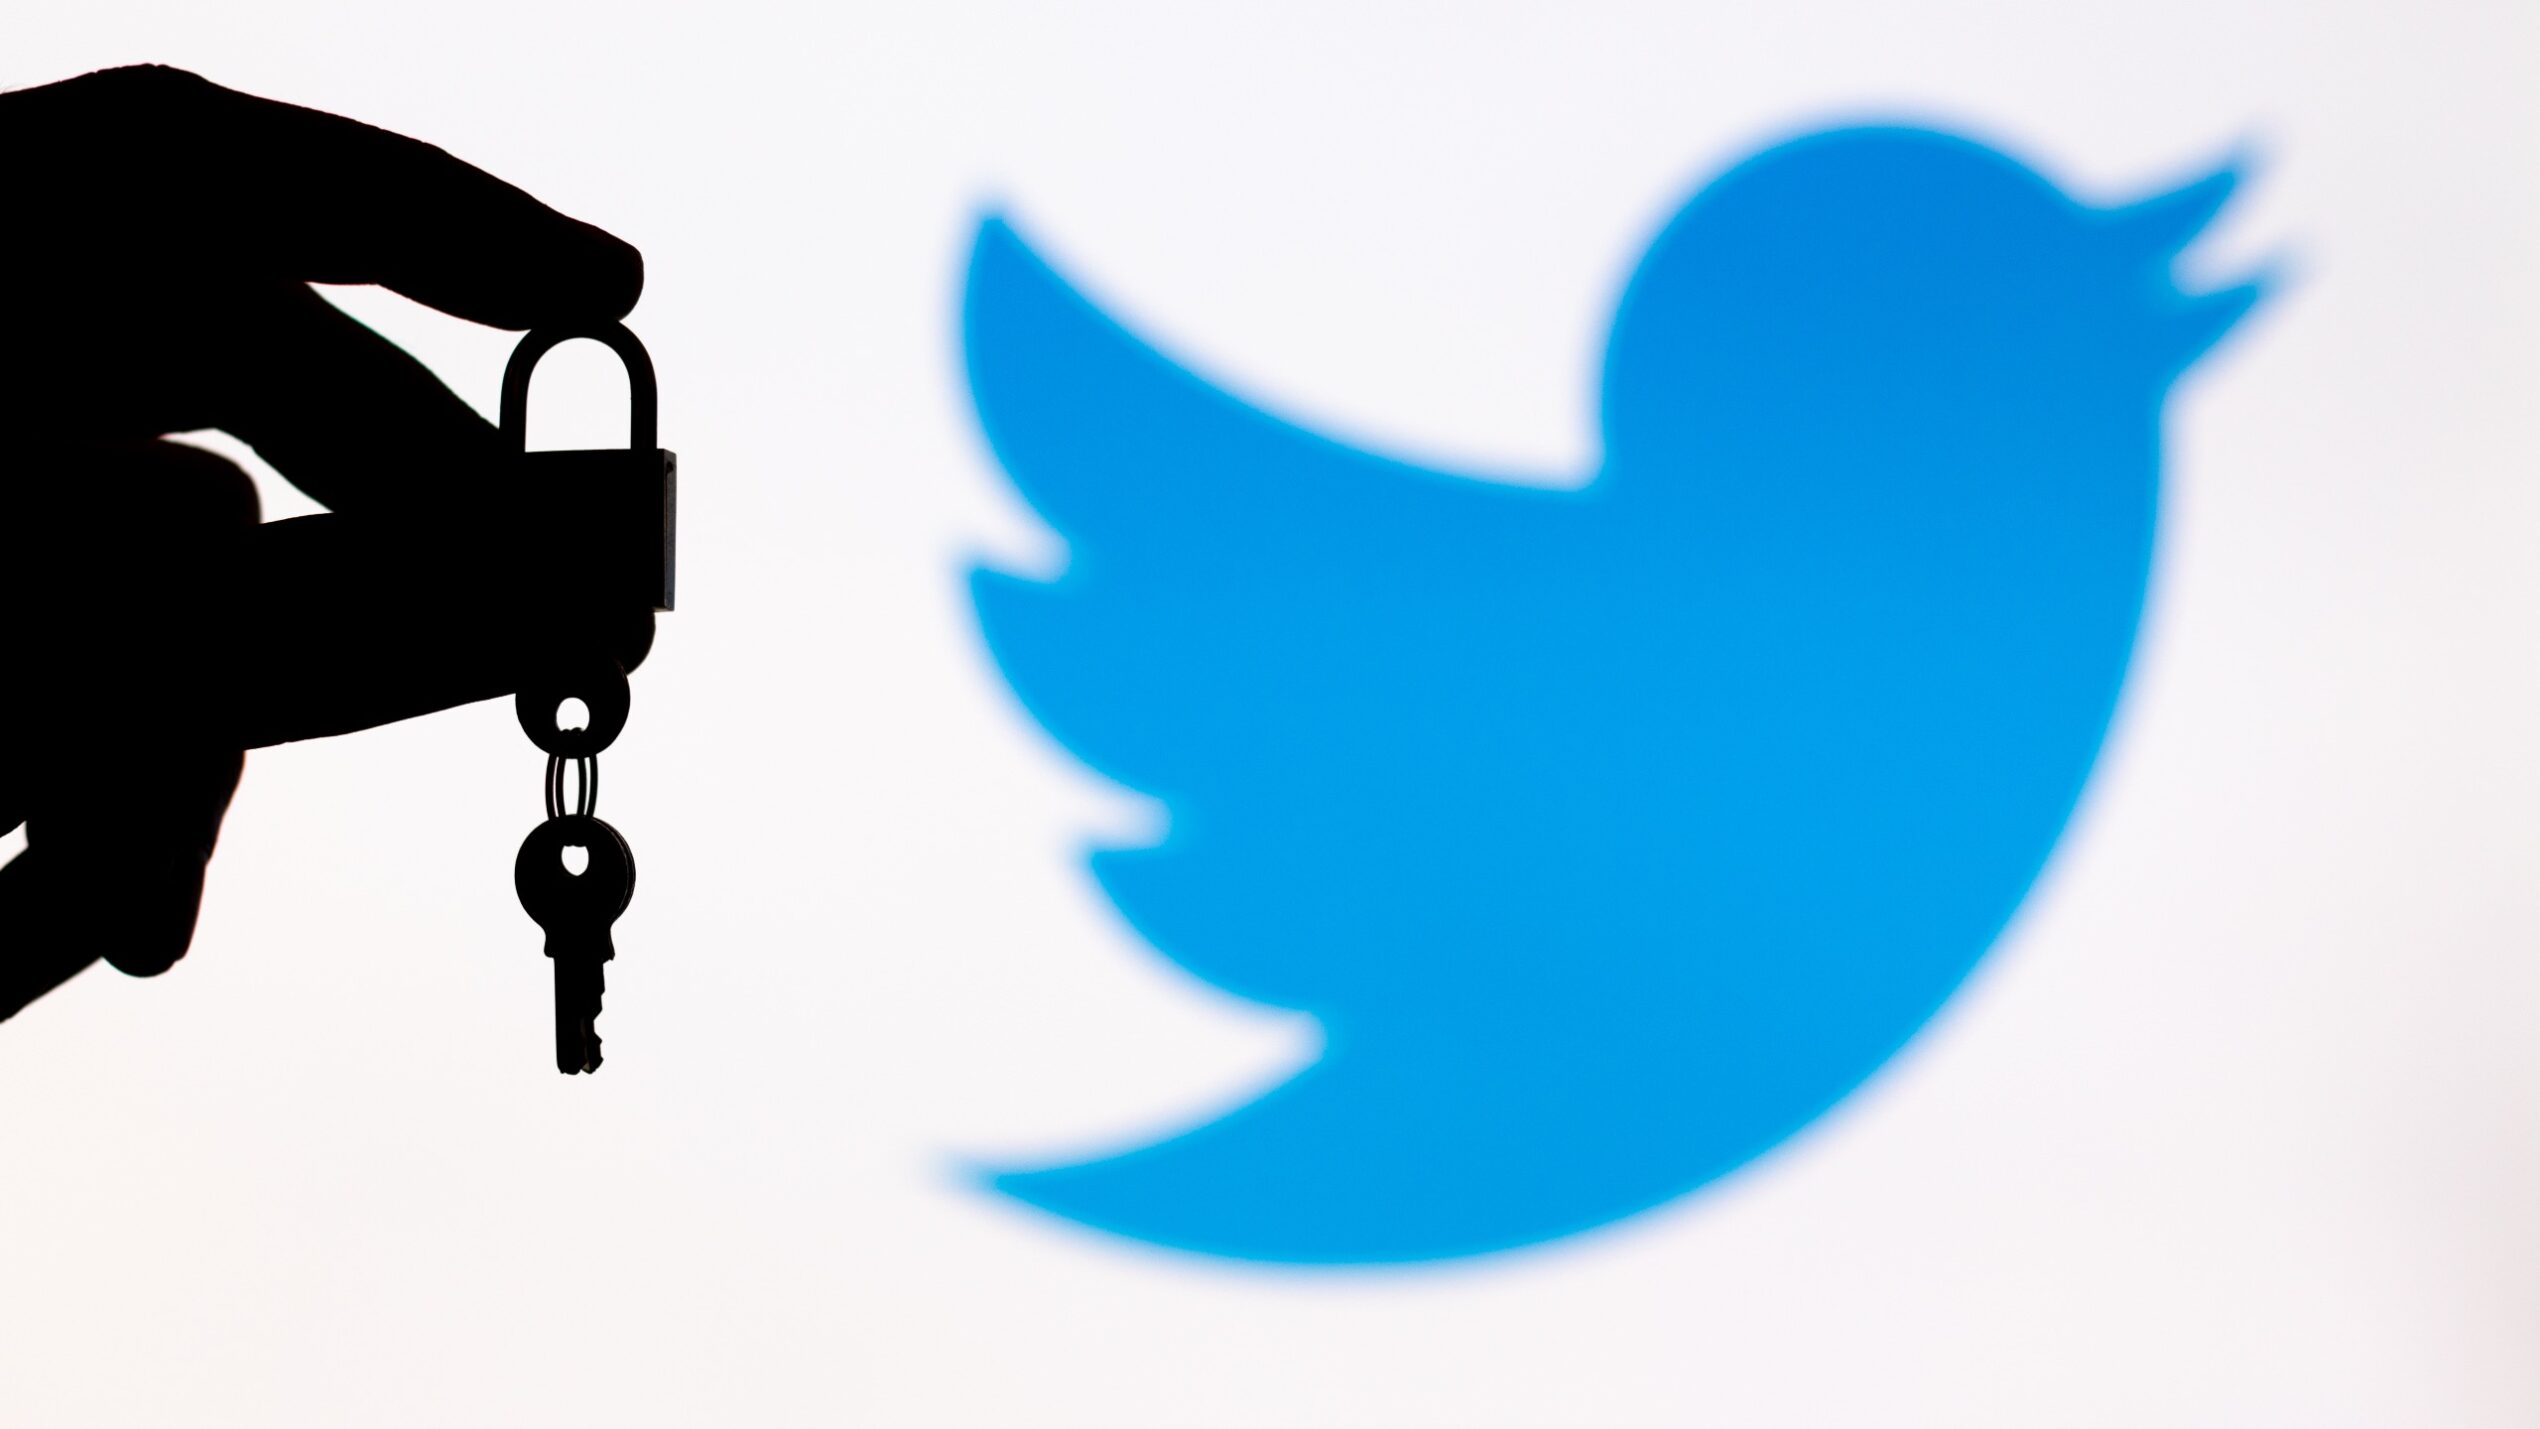 Experts Say Twitter's 2FA Policy Change 'Doesn't Make Sense'